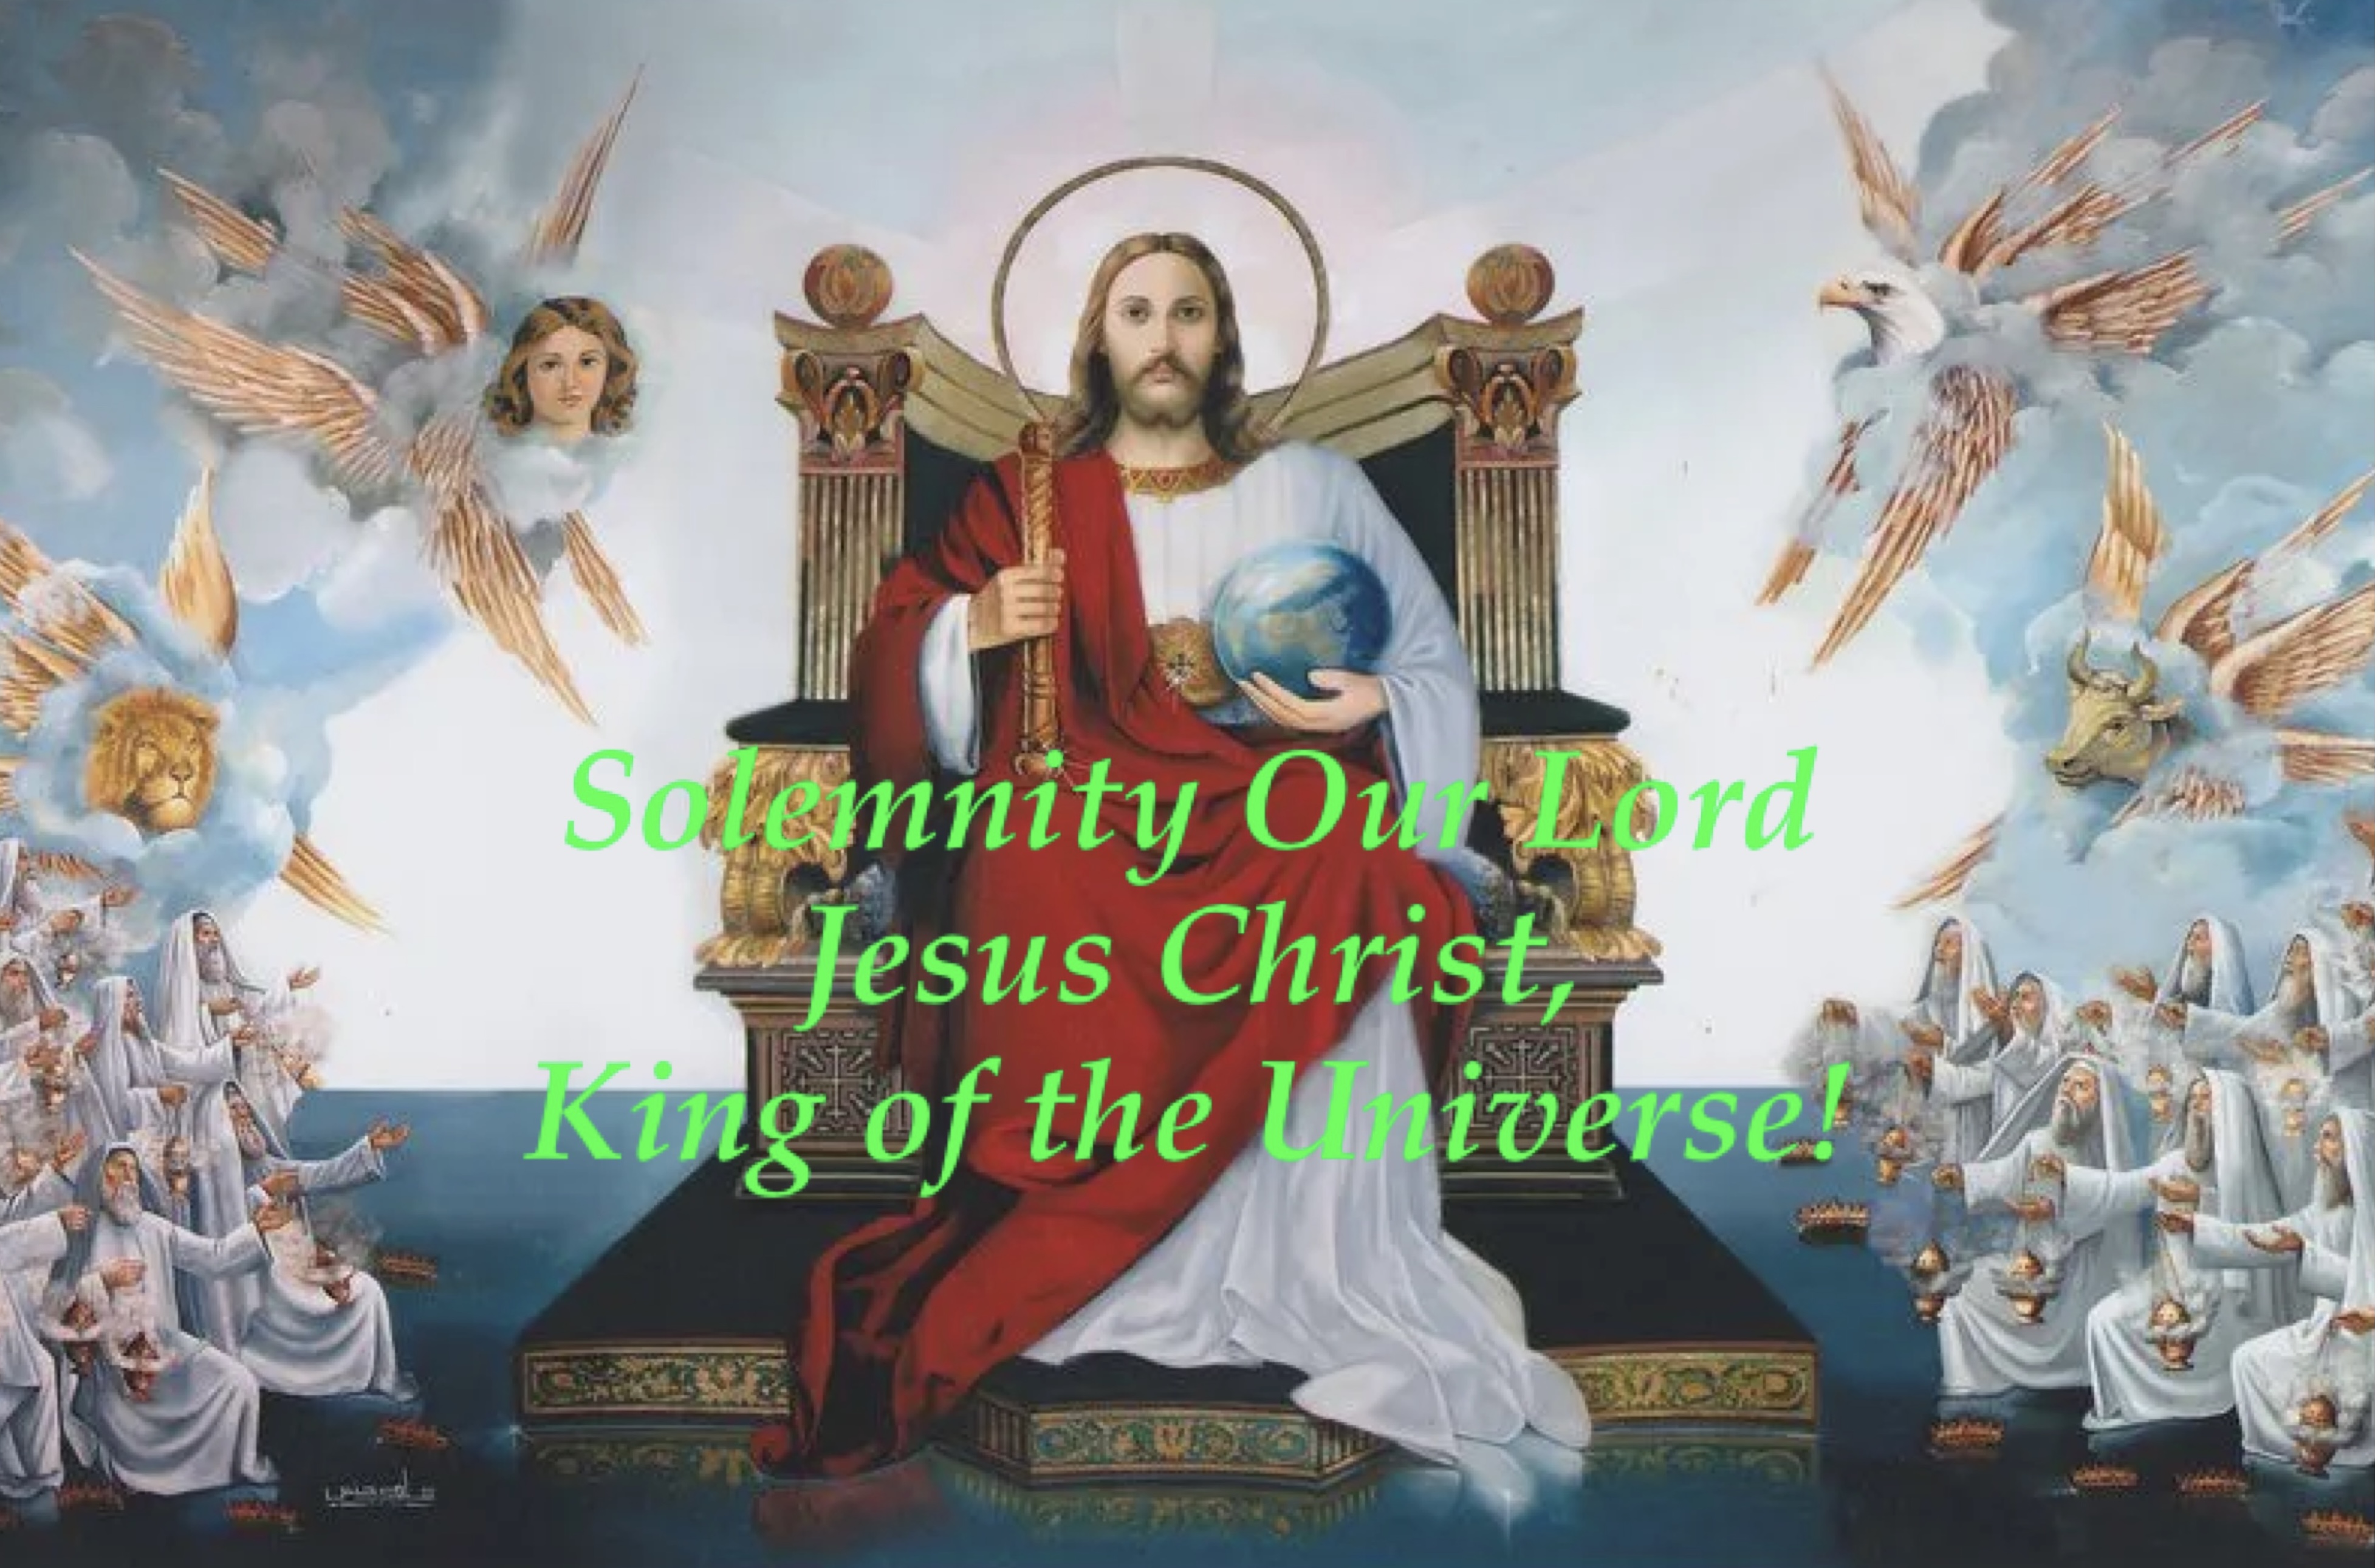 Solemnity of Our Lord Jesus Christ, King of the Universe.